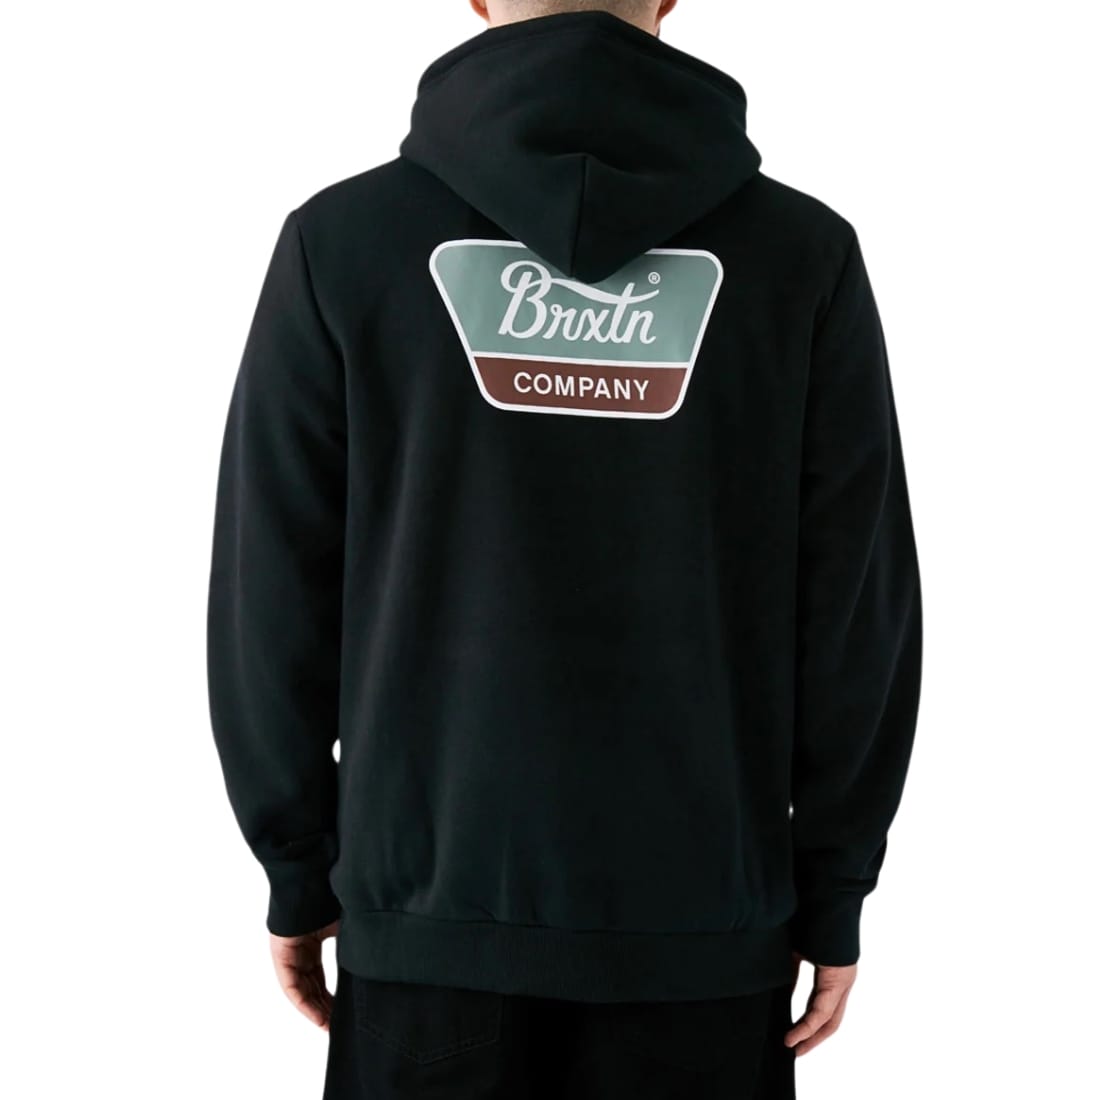 Brixton Linwood Pullover Hoodie - Black/Chinois Green/Sepia - Mens Pullover Hoodie by Brixton